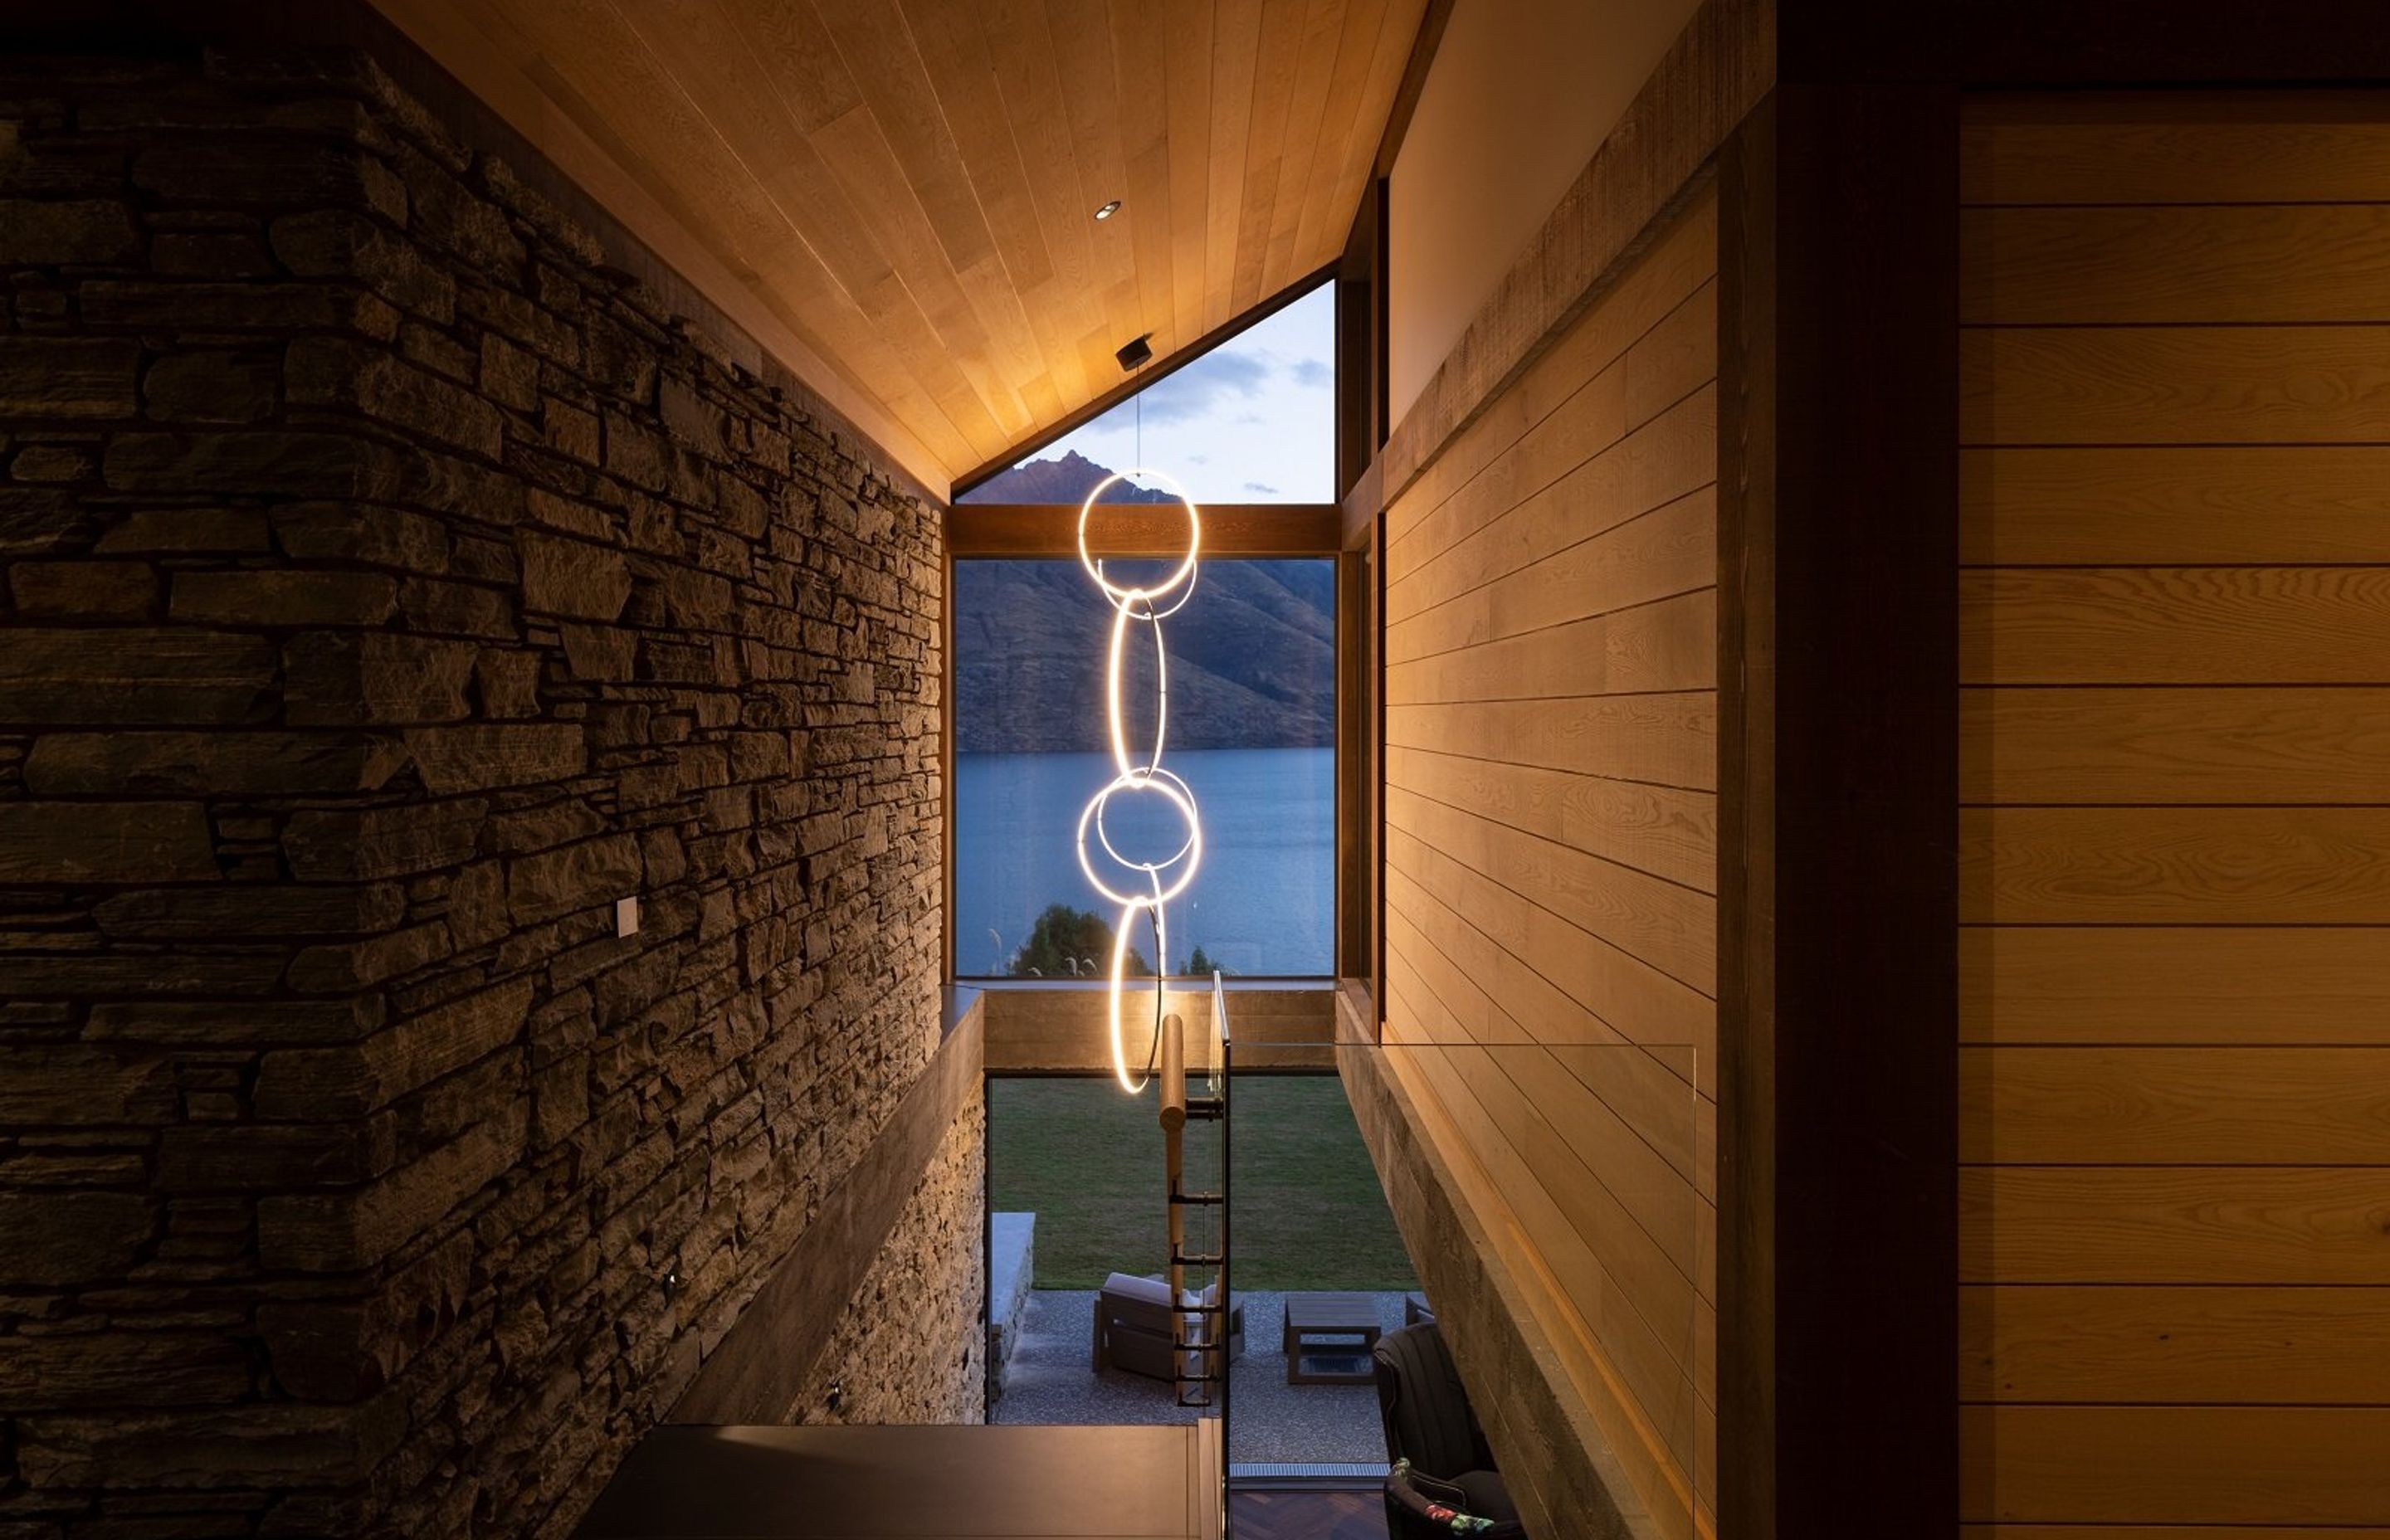 The sculptural Flos pendant light in the stairwell draws your eye out to the view, directly as you enter the main foyer.